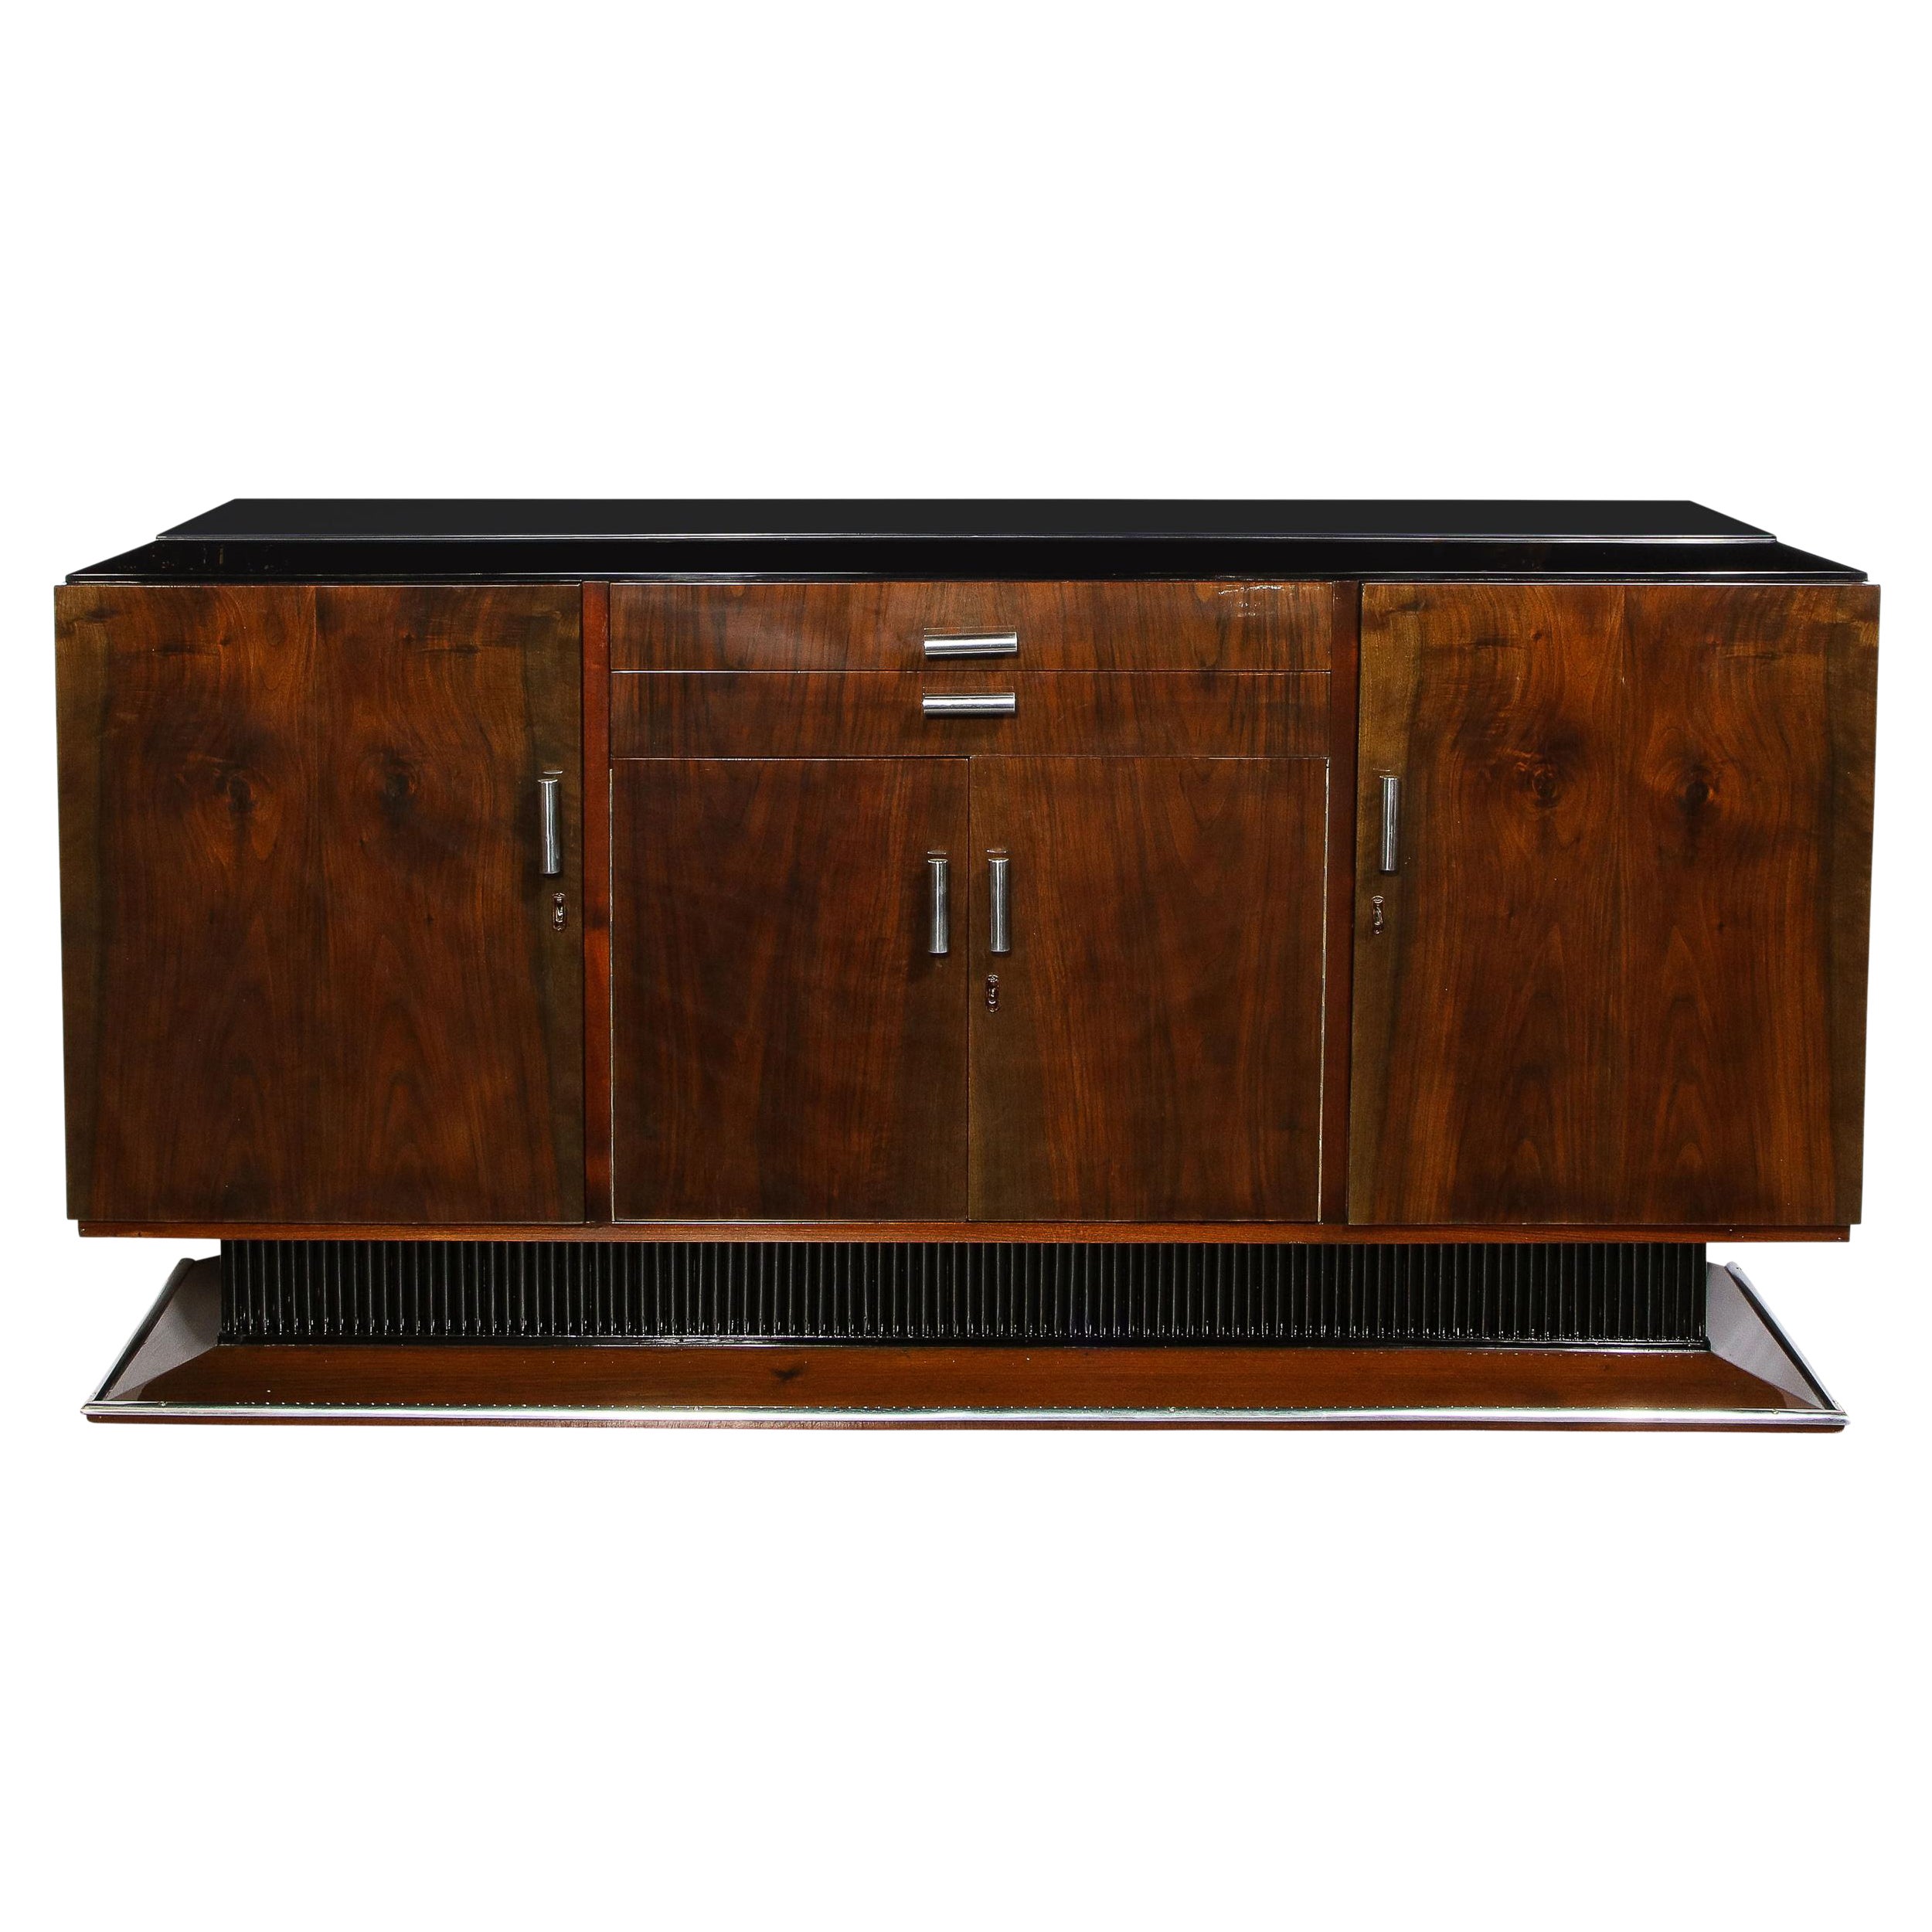 Art Deco Bookmatched Walnut & Lacquer Sideboard with Streamlined Aluminum Pulls